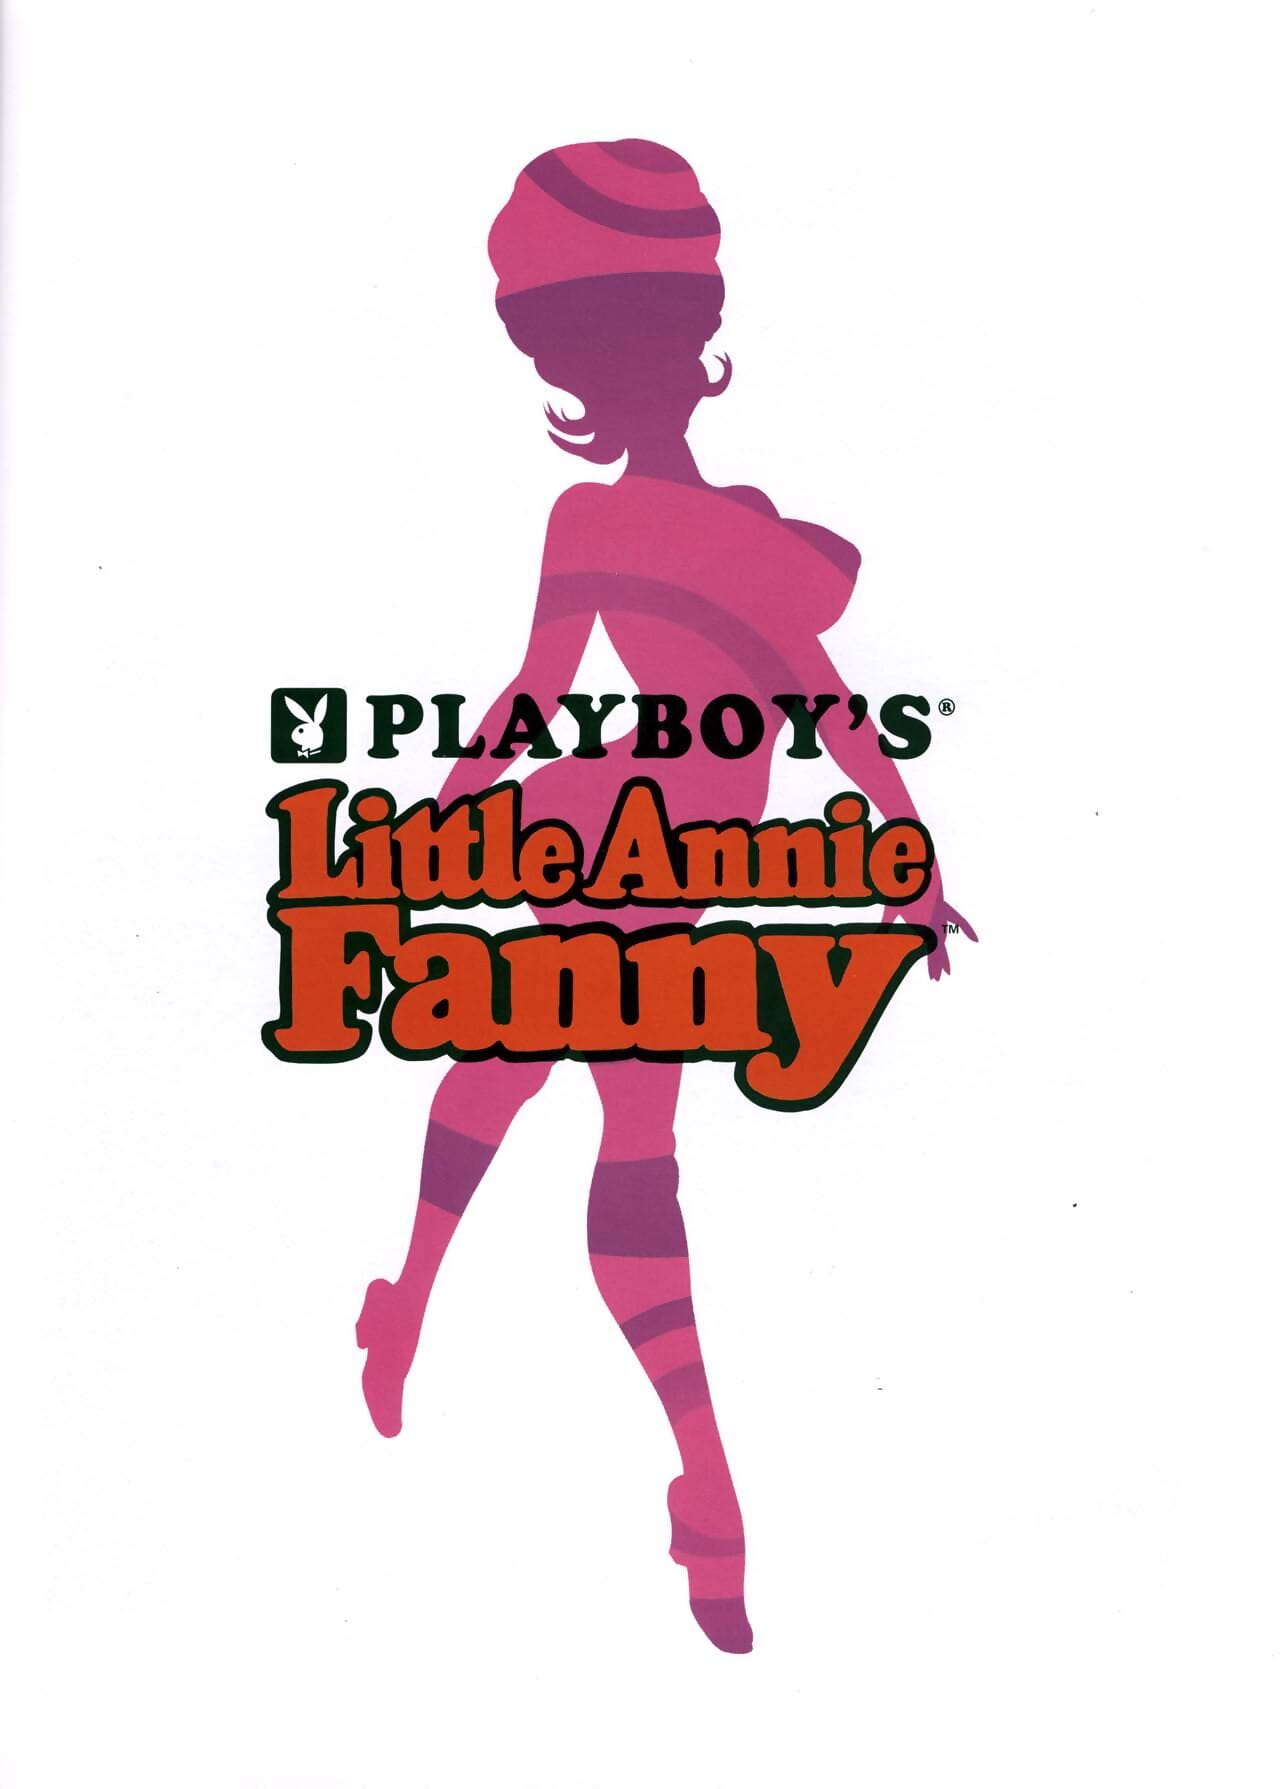 Playboys Passing Annie Hit up Vol. 1 - 1962-1965